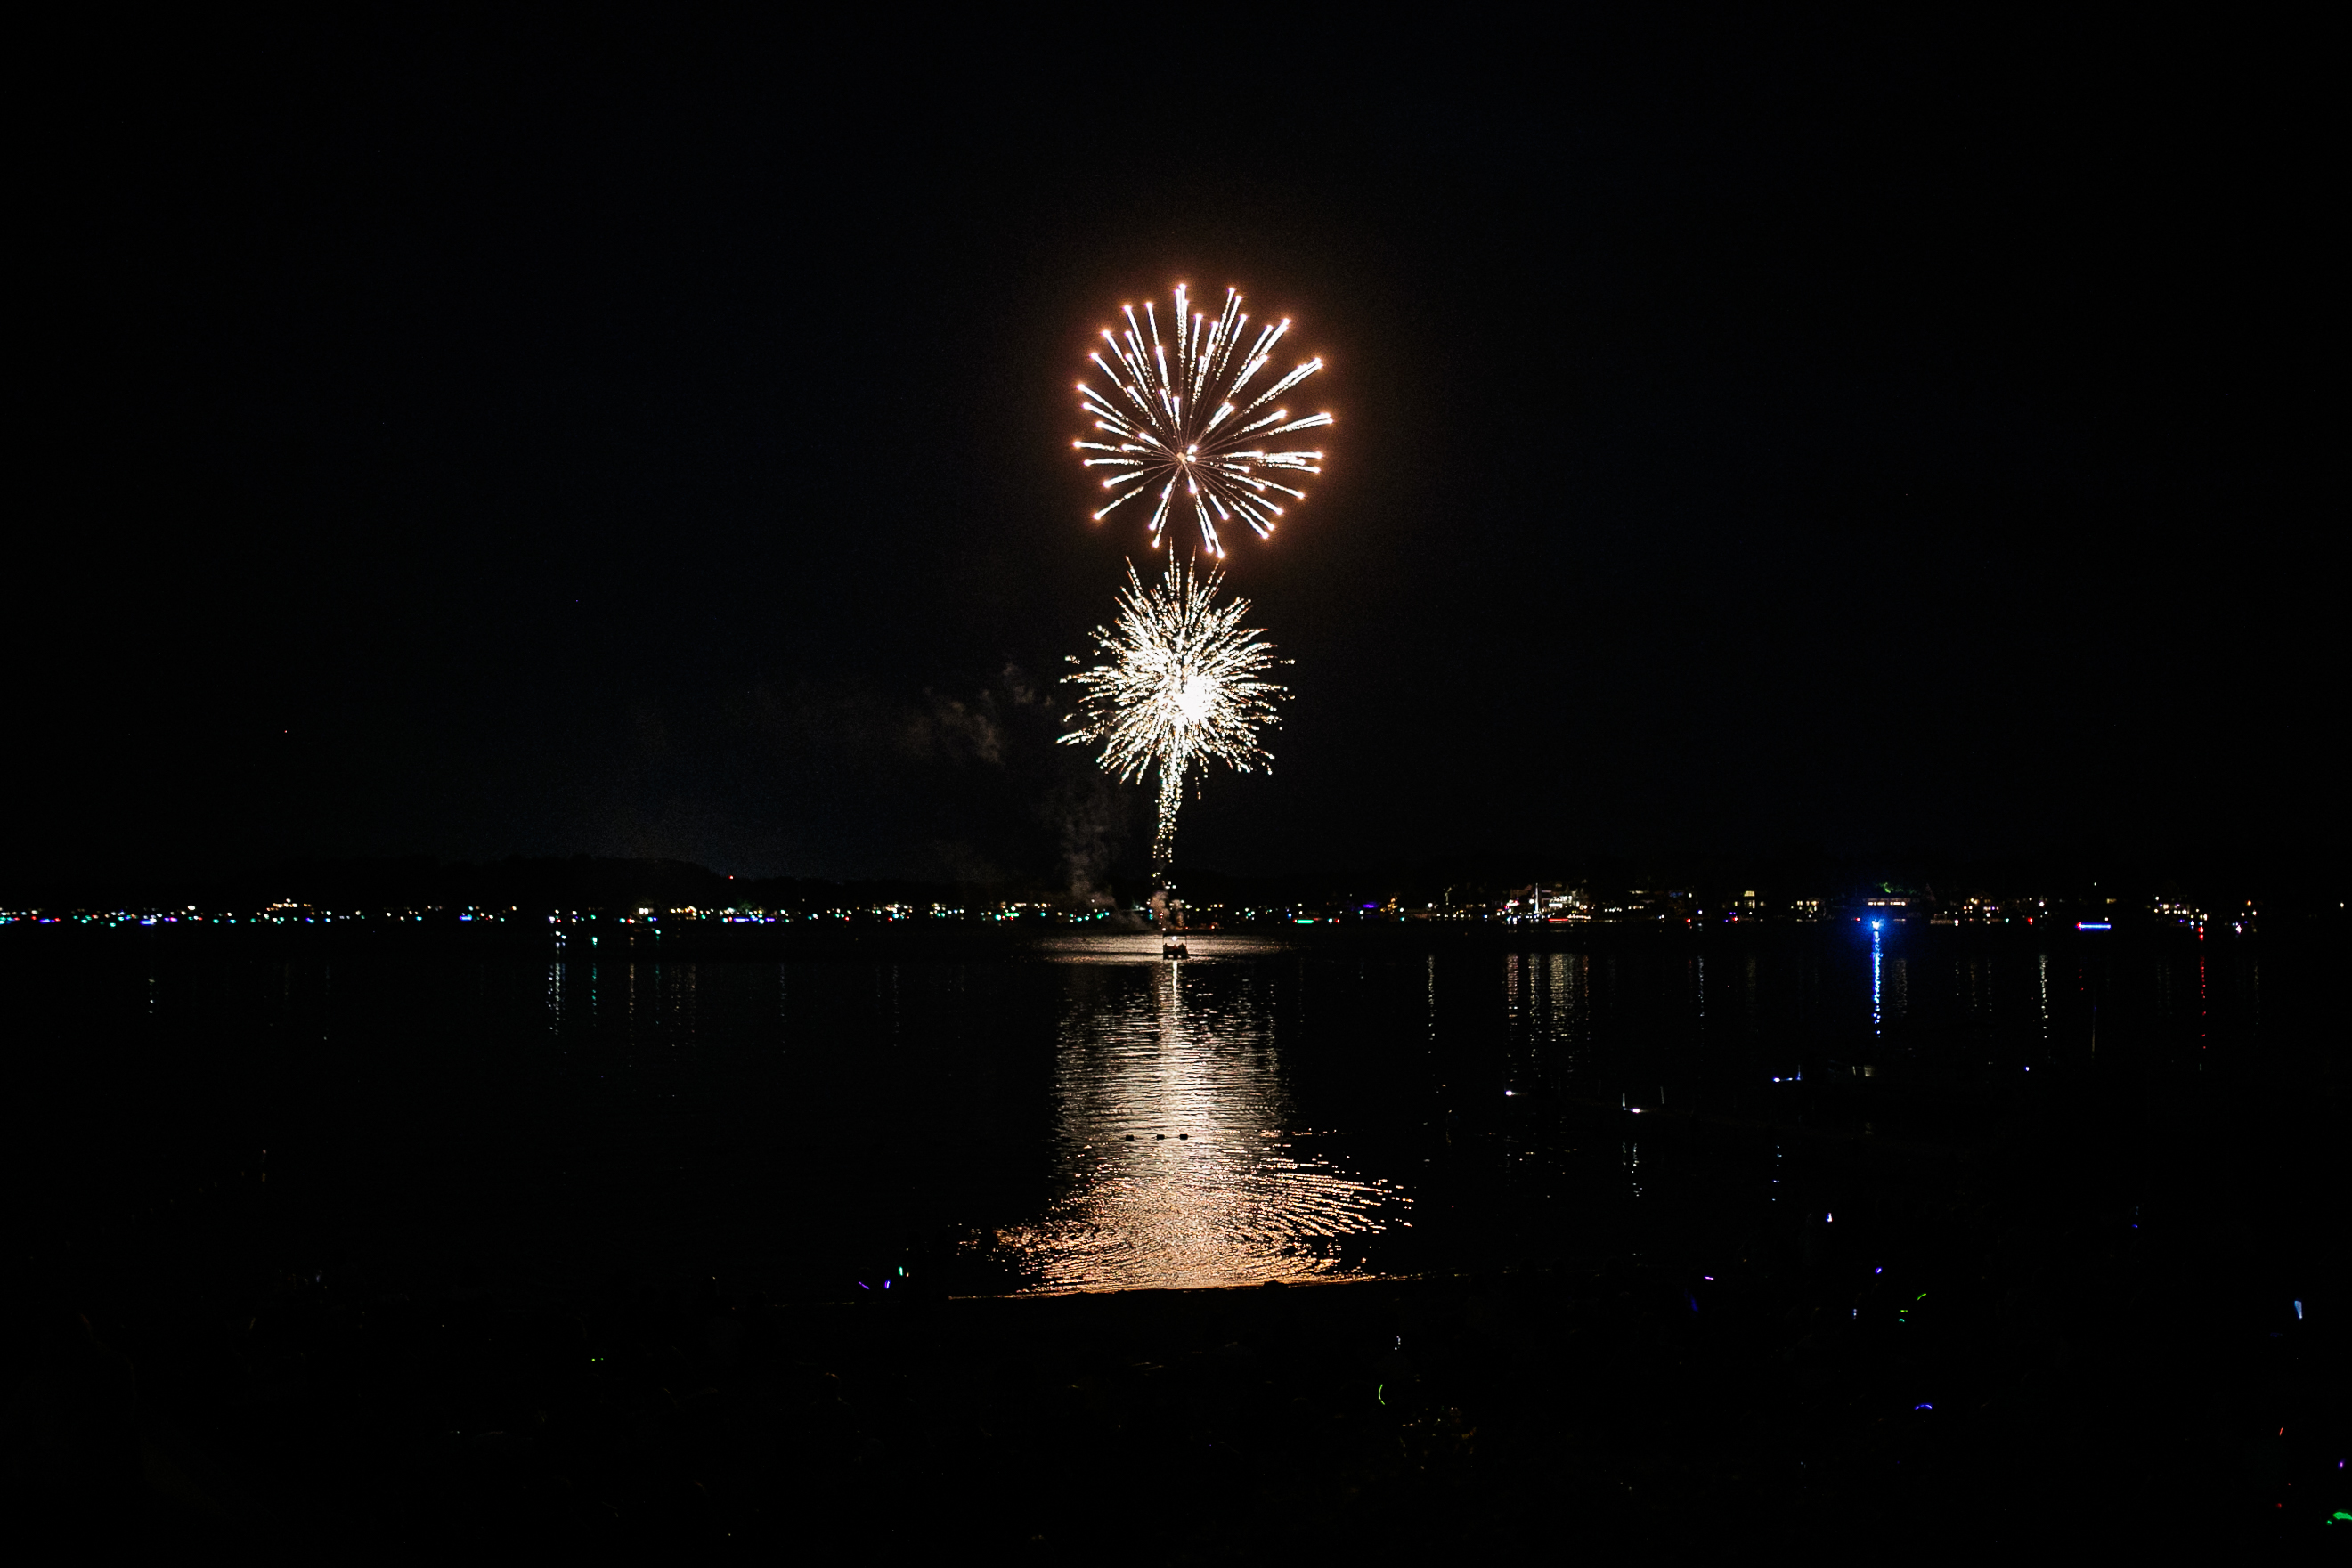 Fireworks blast off from a barge in the middle of the lake during the annual Lake Fenton Fireworks on the water in front of the Township hall on Saturday, June 2, 2022 in Fenton Township. (Jenifer Veloso | MLive.com)

